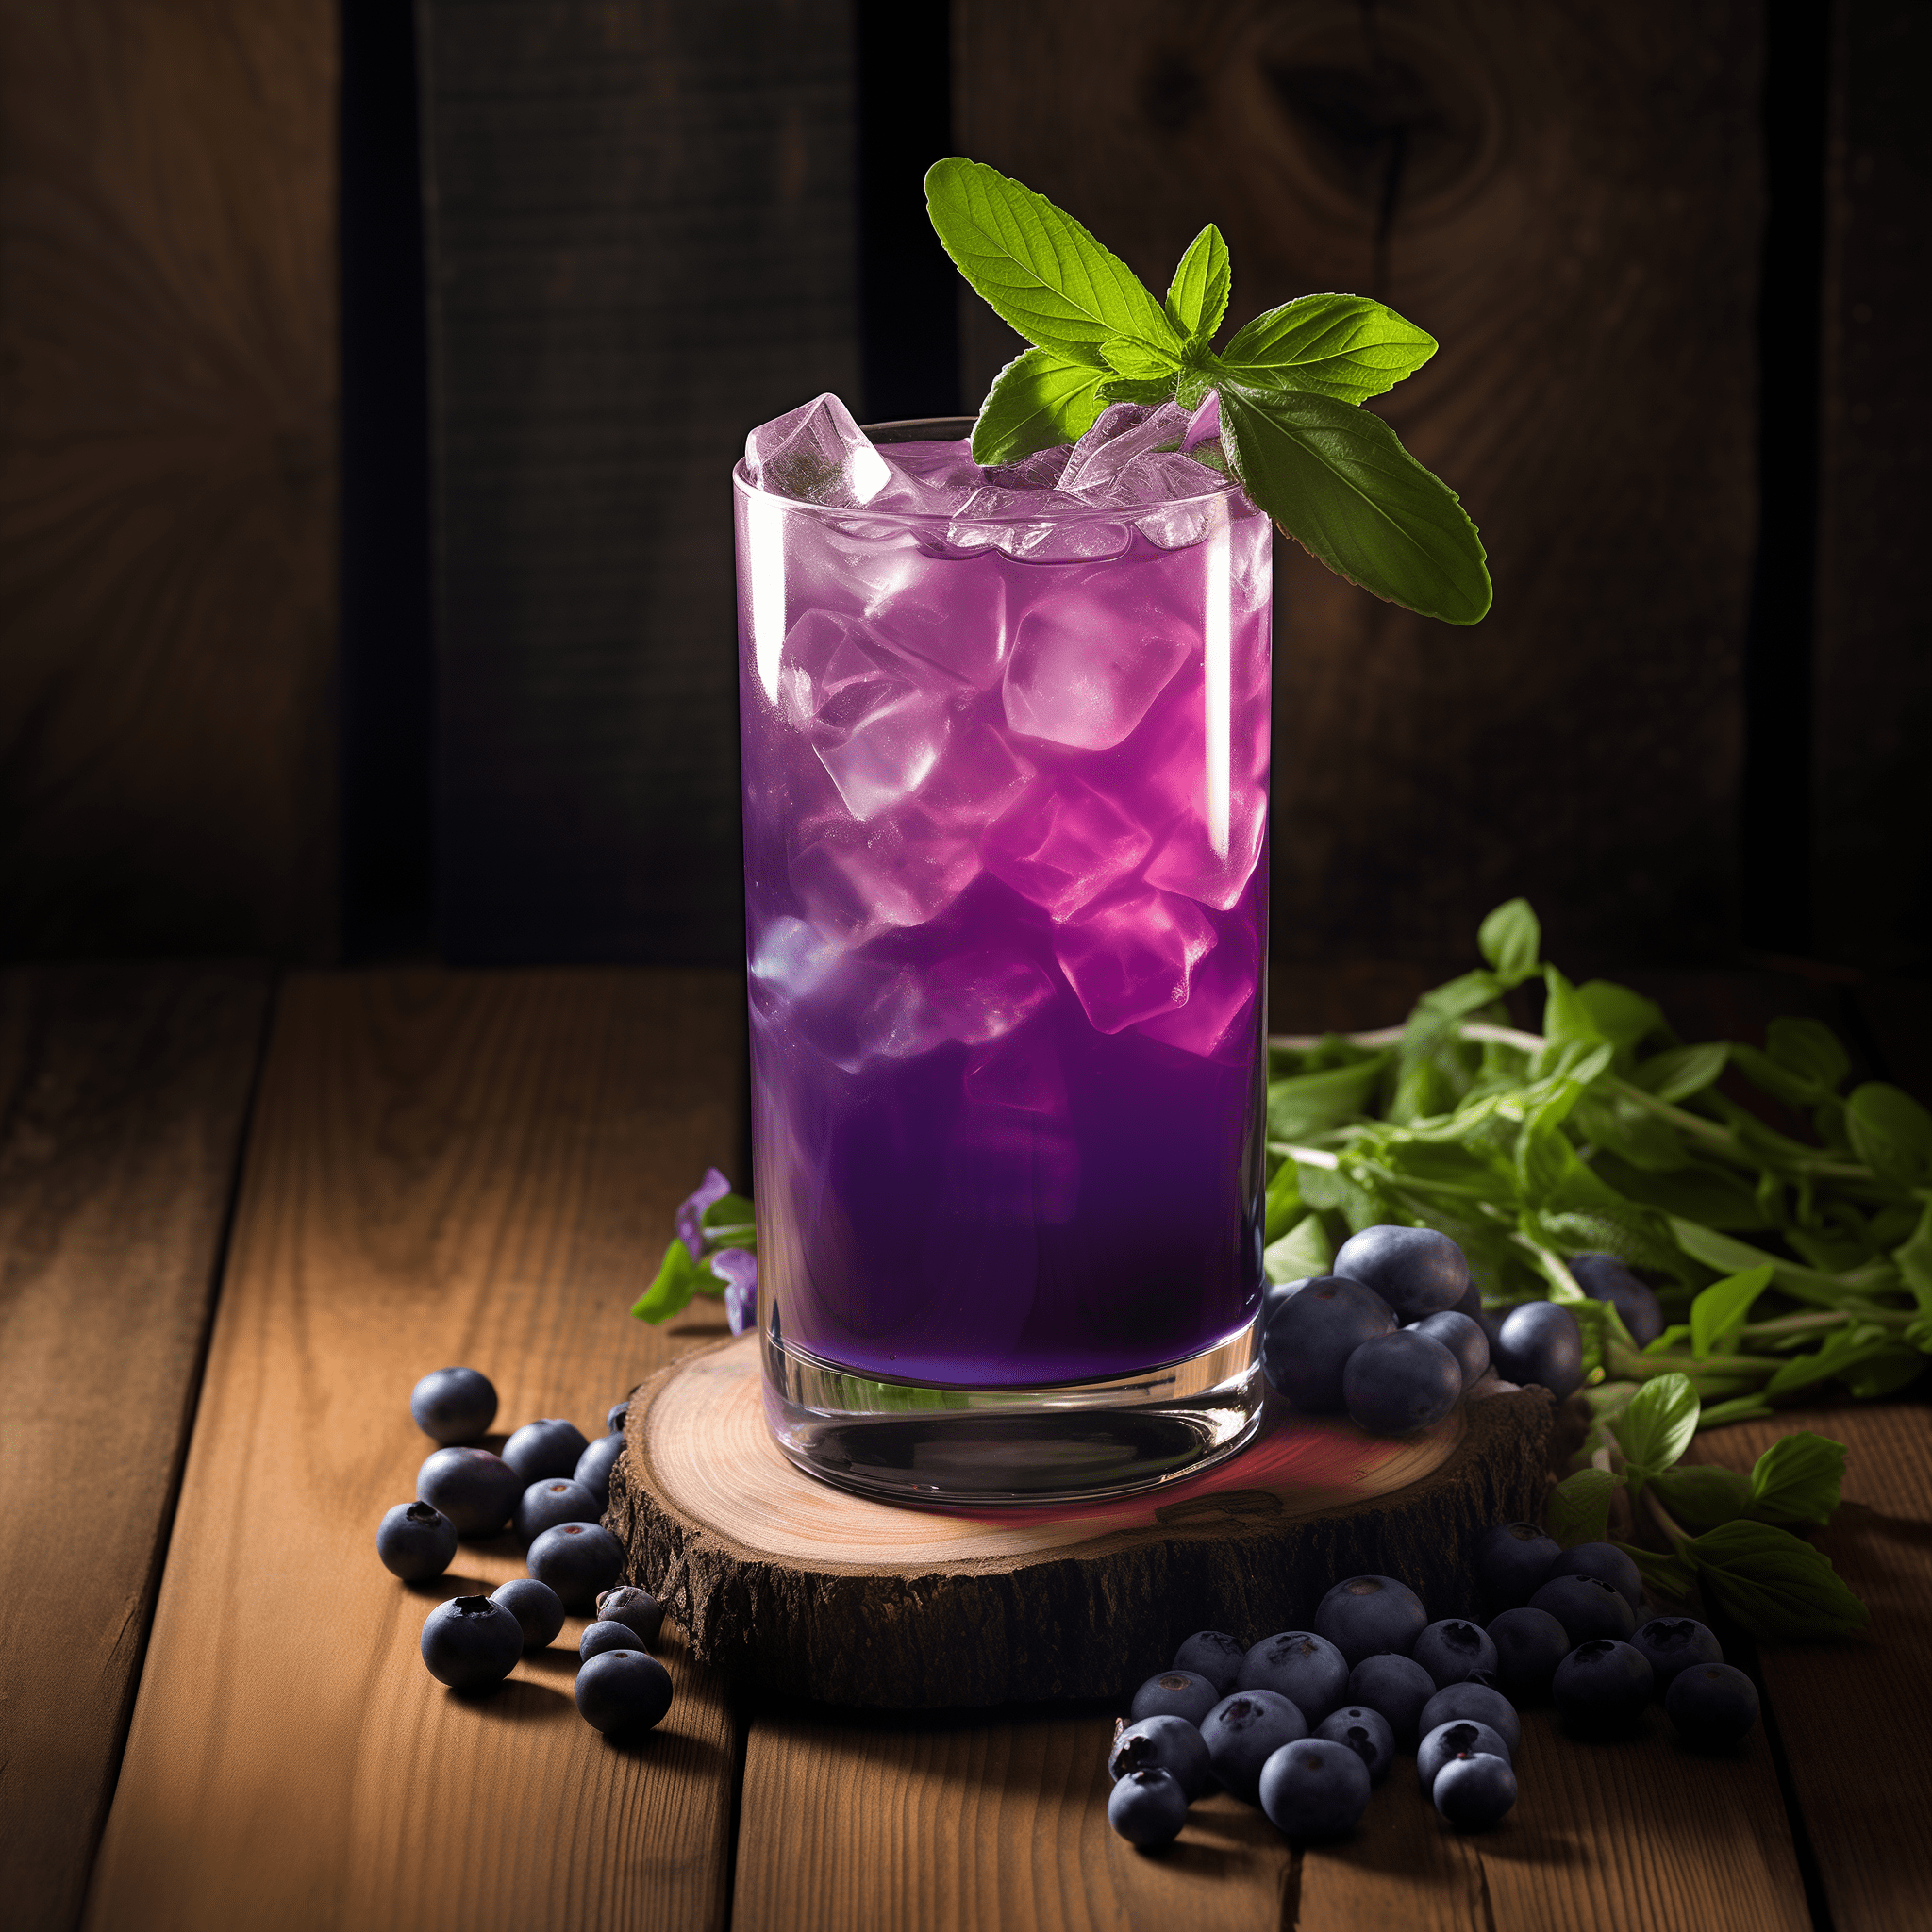 Blueberry Sage Cocktail Recipe - The Blueberry Sage cocktail offers a delightful blend of flavors. It's refreshingly sweet with a subtle tartness from the blueberries, while the sage provides an aromatic, earthy undertone. The vodka base adds a clean, strong kick, making the drink both invigorating and complex.